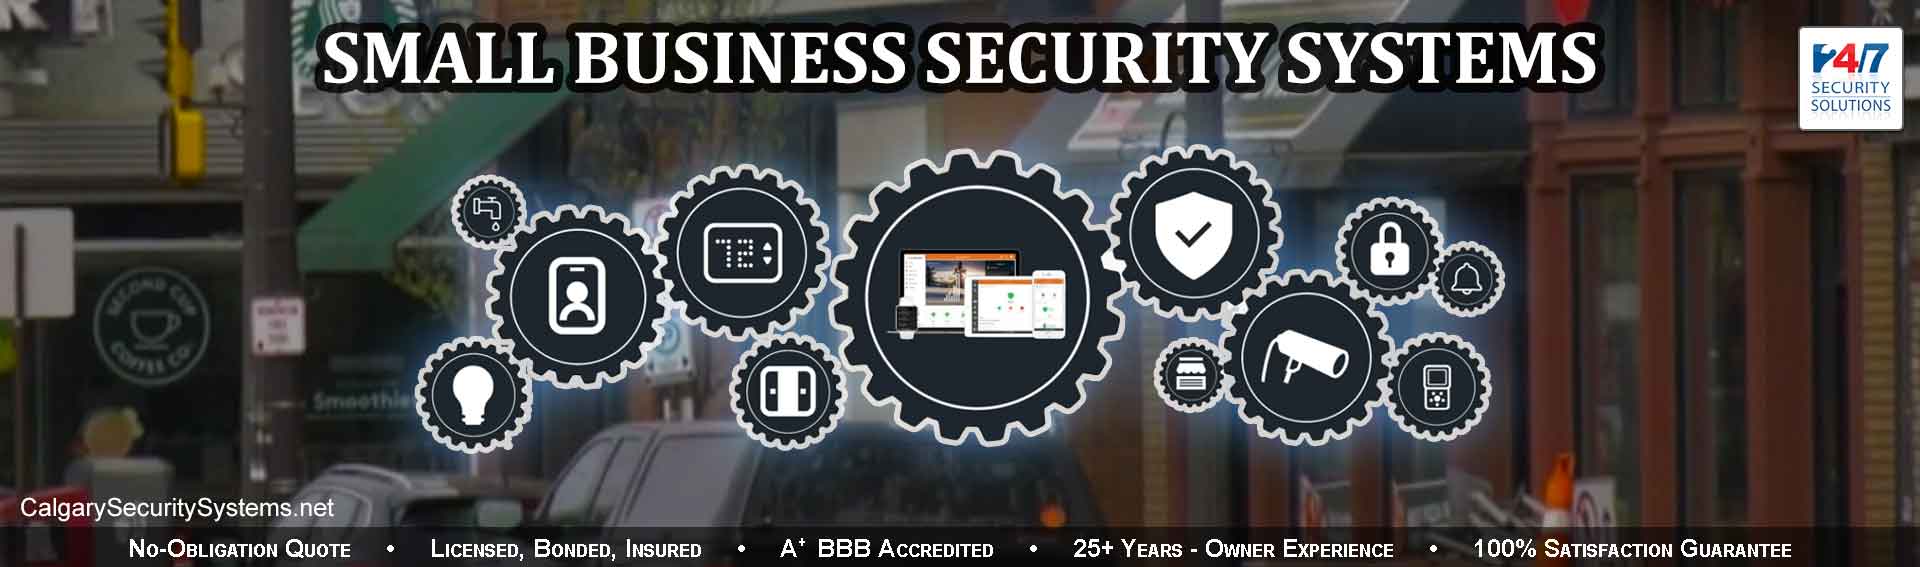 Calgary Alarm Systems - Small Business Security Systems